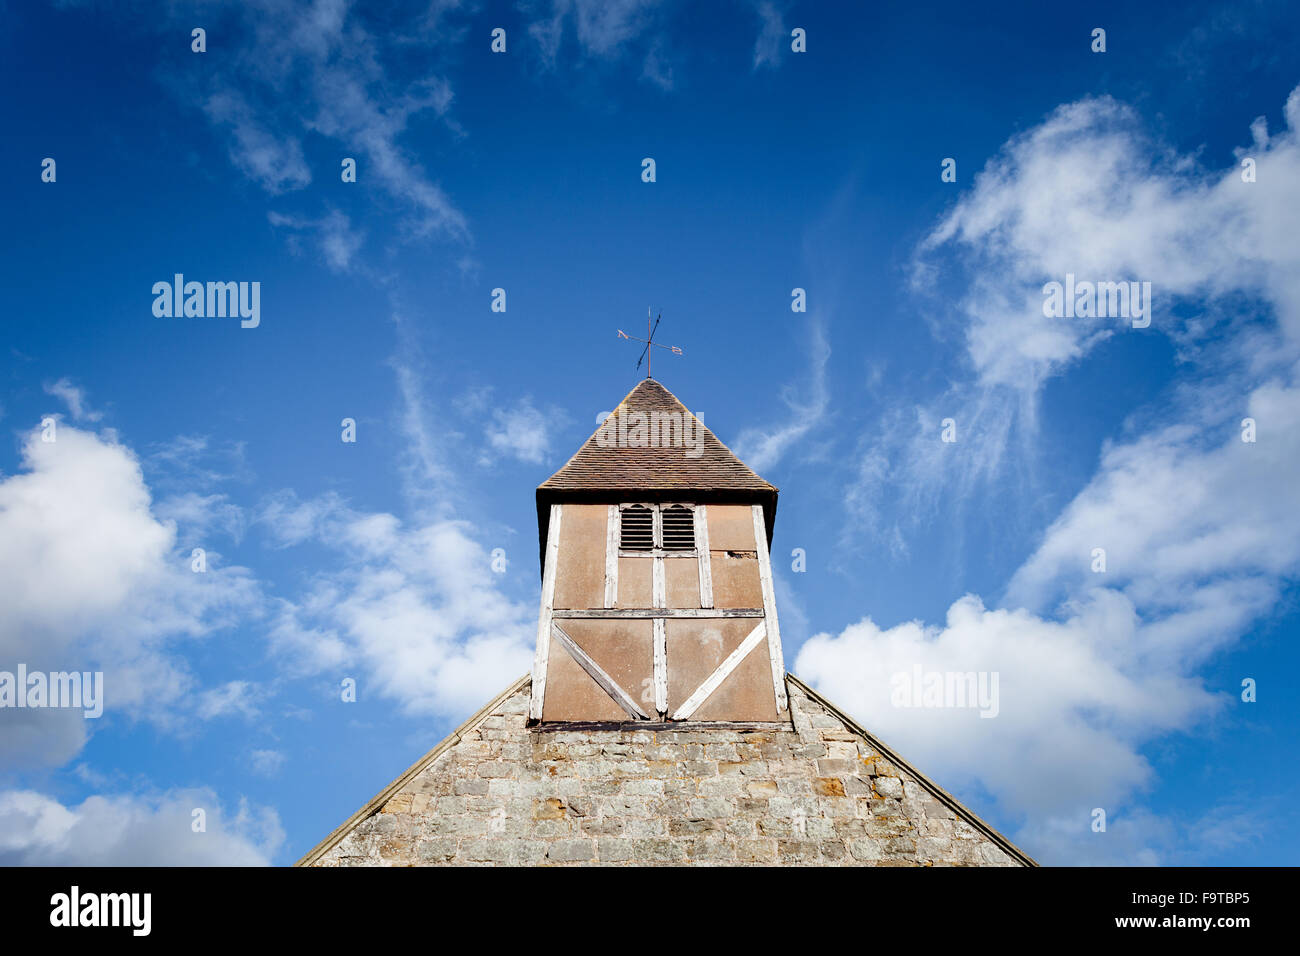 17th Century British Church Tower Bell on Cloudy Blue Sky Stock Photo